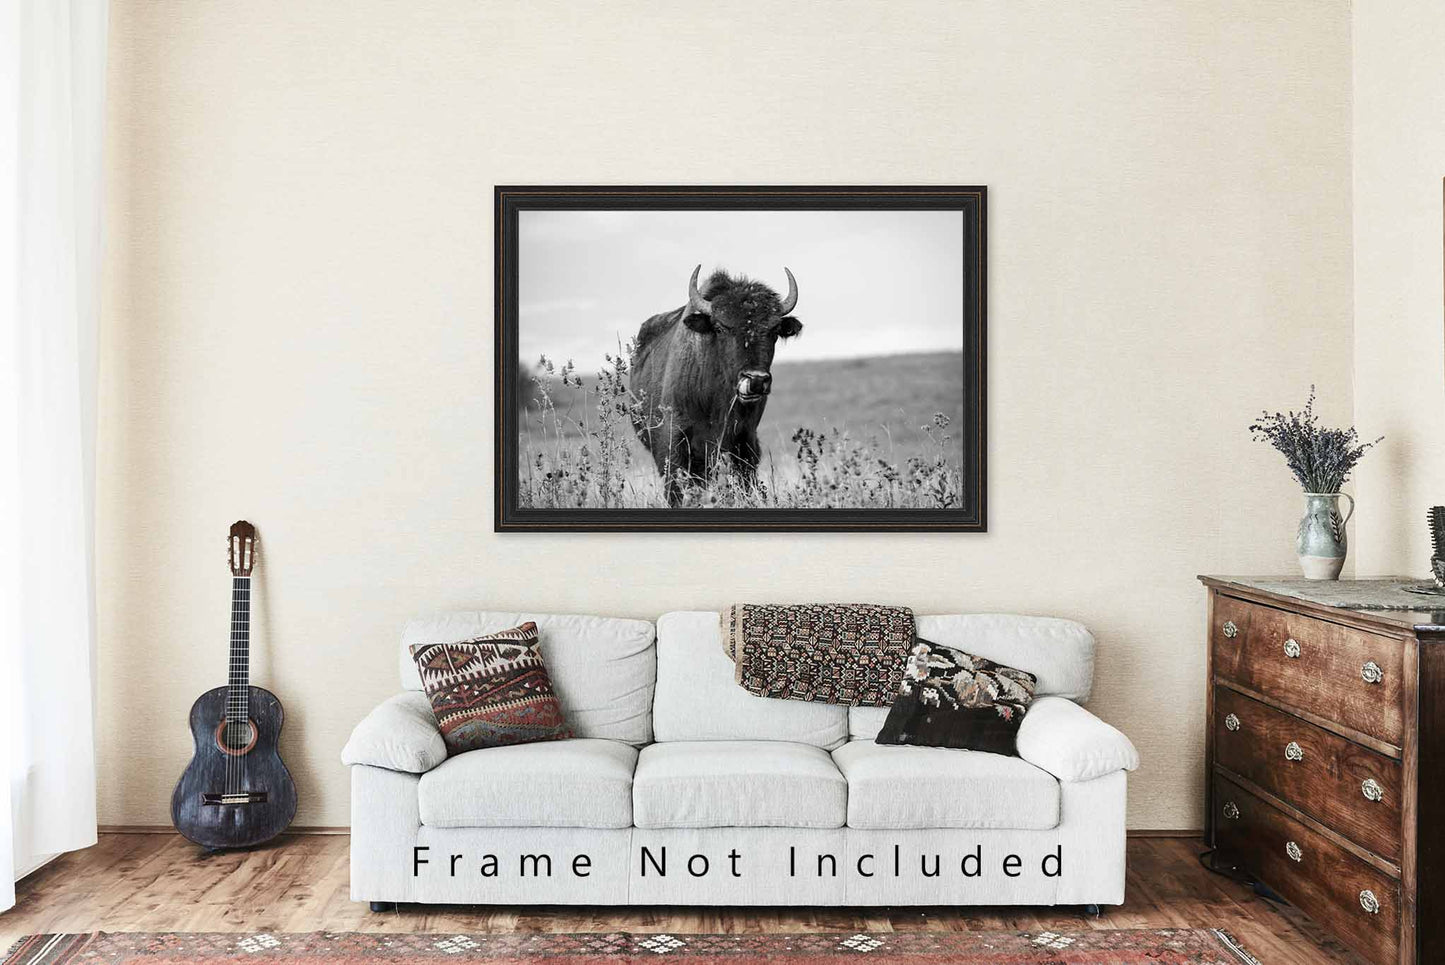 Buffalo Wall Art Photography Print - Black and White Picture of a Bison on the Tallgrass Prairie in Oklahoma - Unframed Animal Artwork Decor